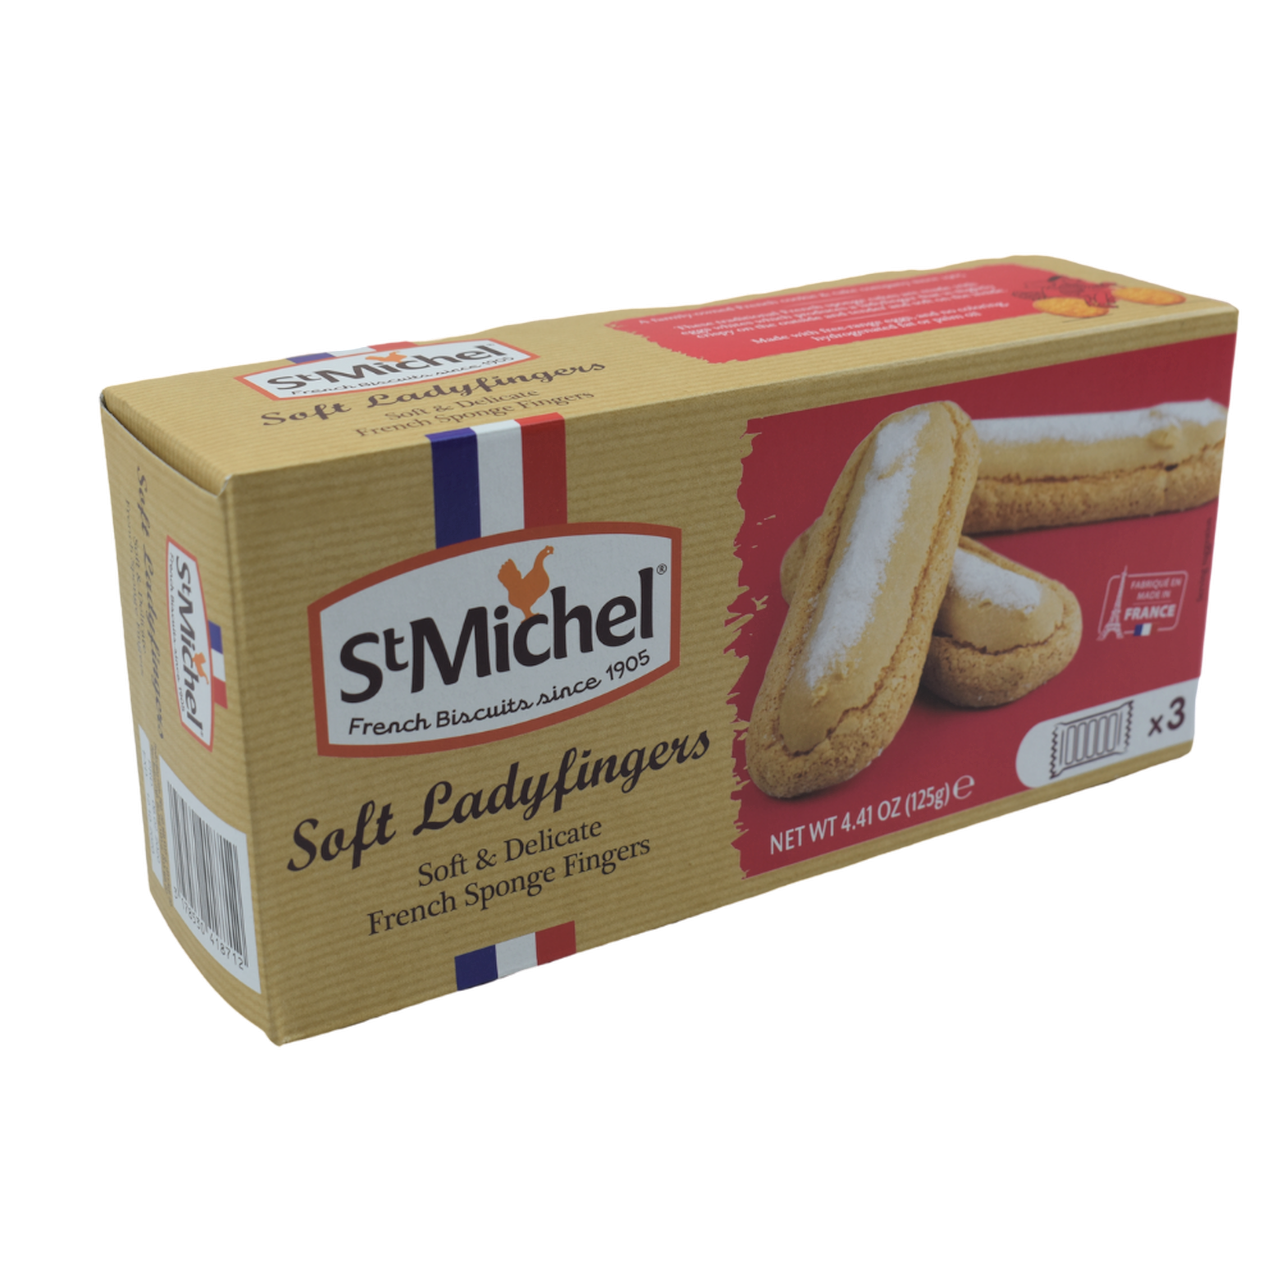 St Michel Soft Ladyfingers is a slightly crispy spongy cookie, made with egg whites for tenderness and a light sugar crust on top. Also known as "Biscuit à la cuillère"